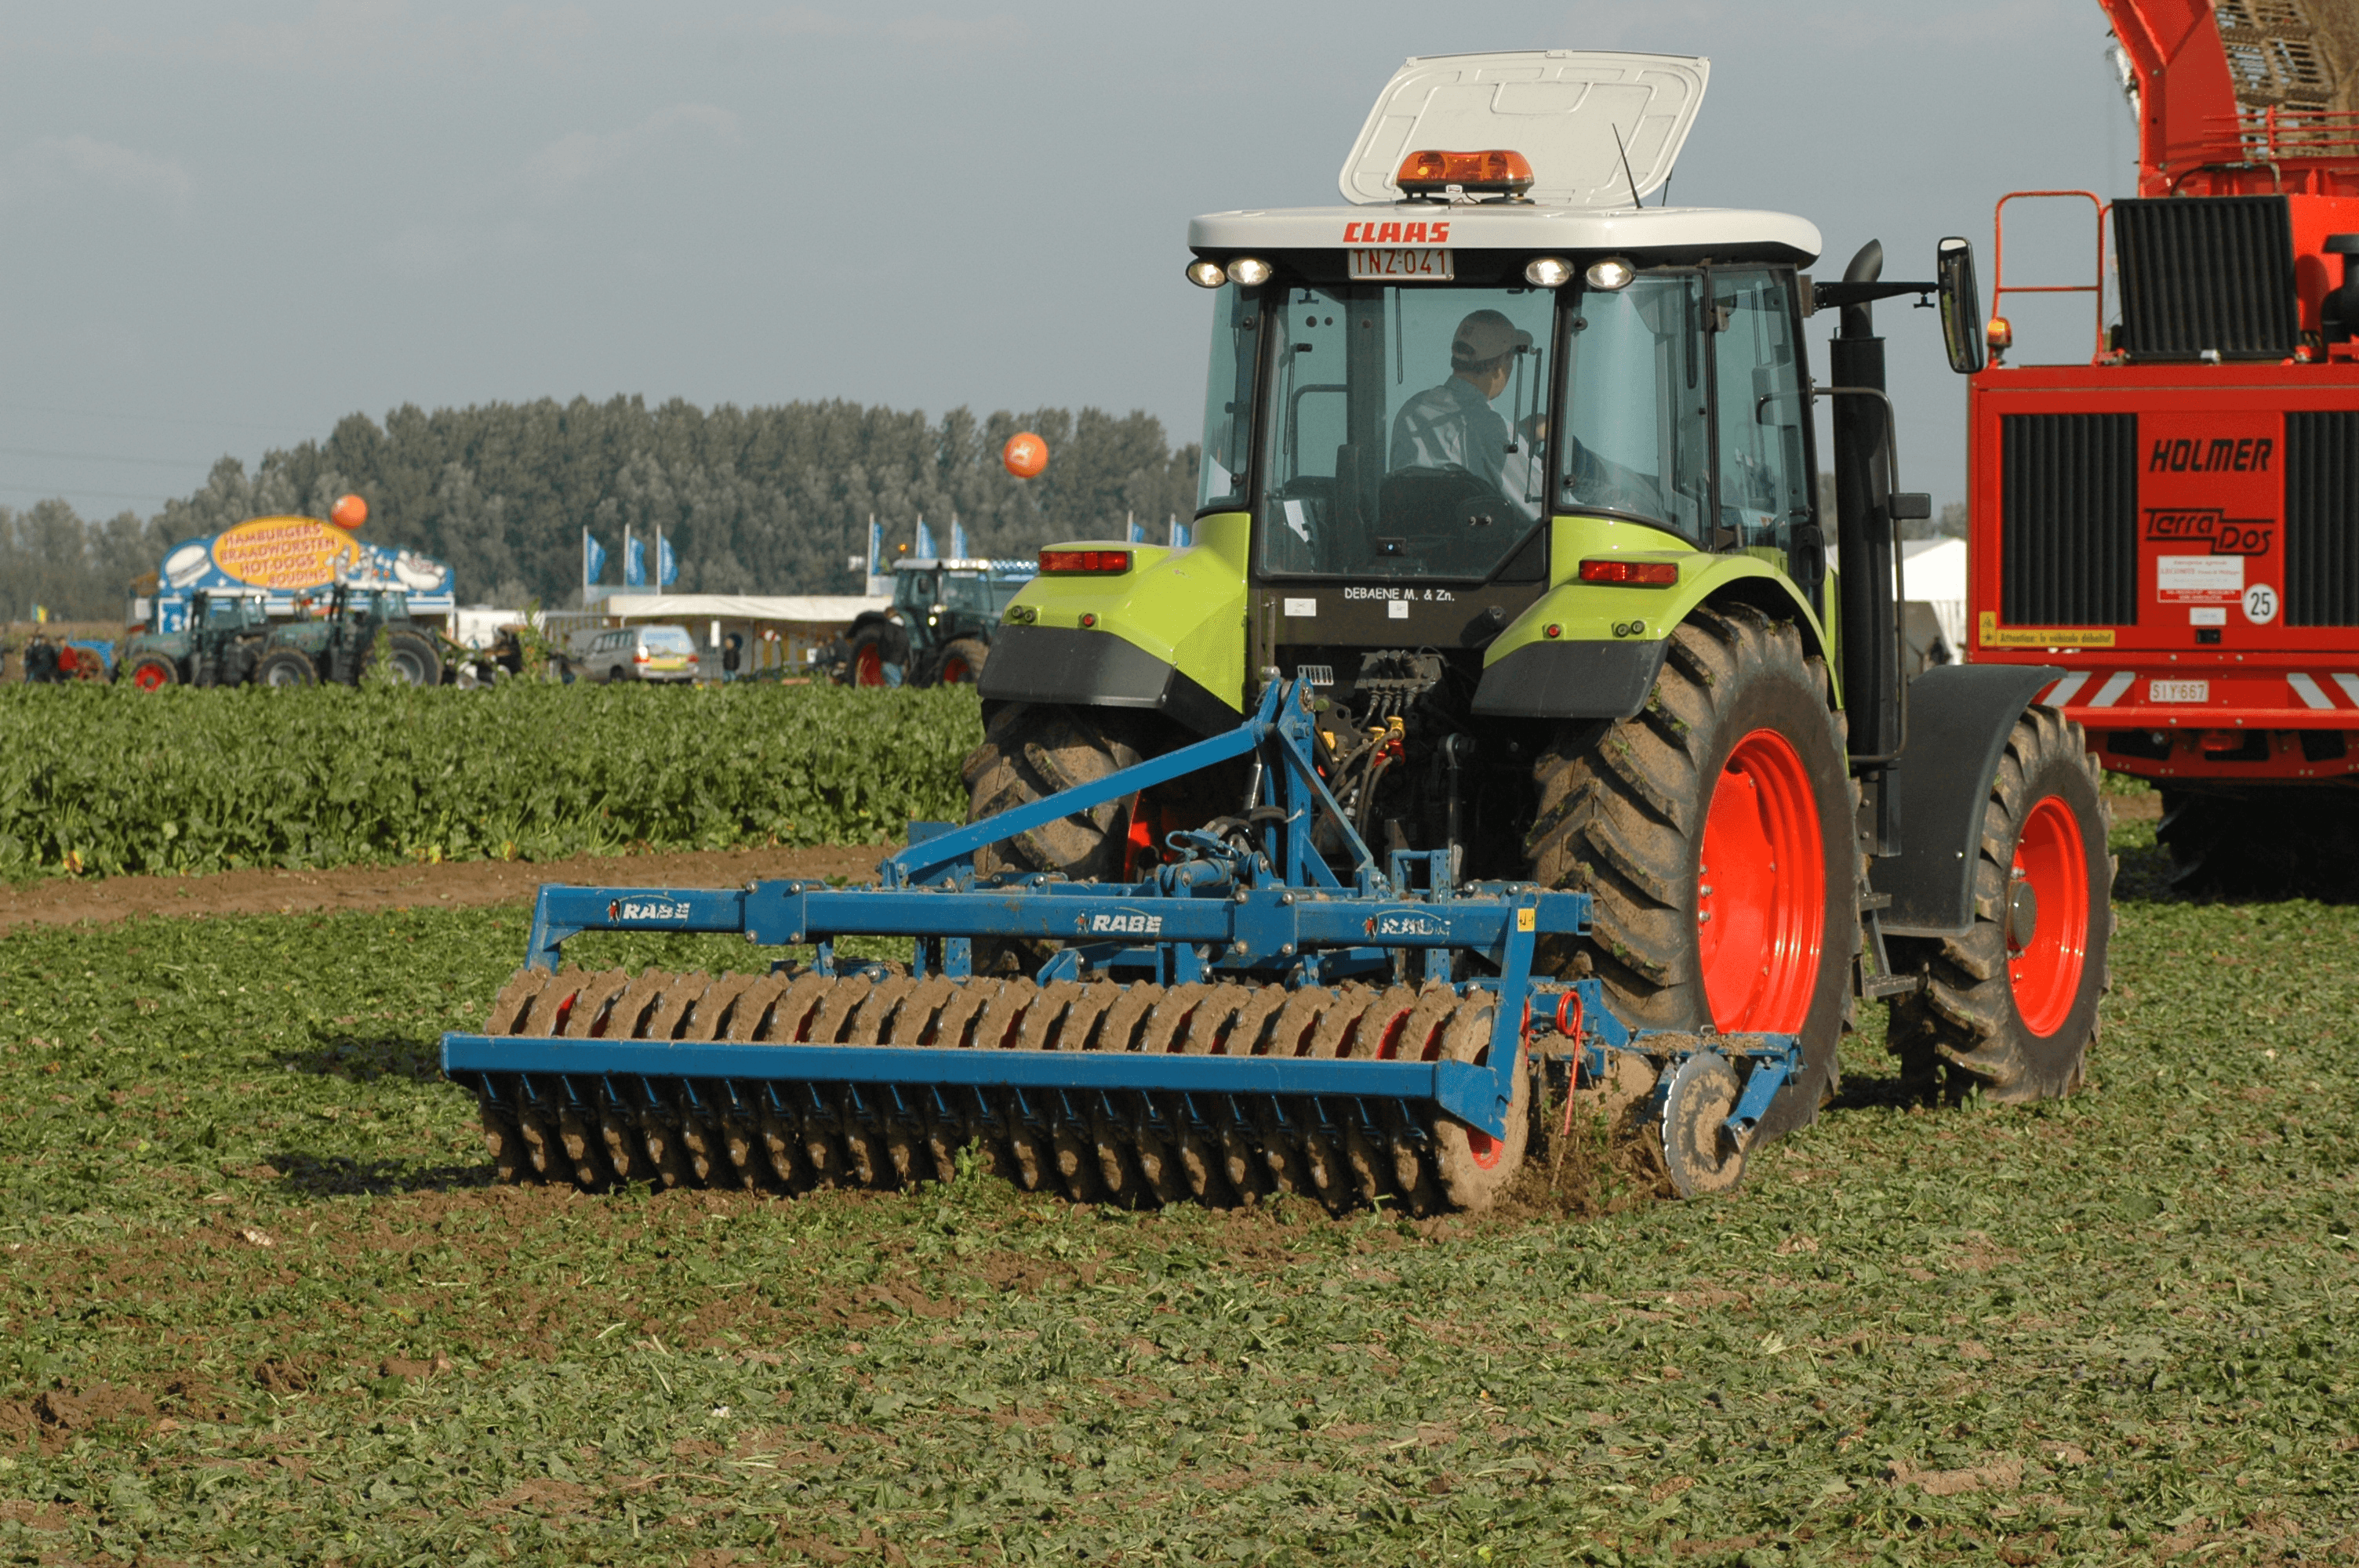 Claas_tractor_with_Rabe_harrow,_Werktuigendagen_2005_-_af87dfccb8ce74f87a4c93a0e737838f6.png (3008×2000)